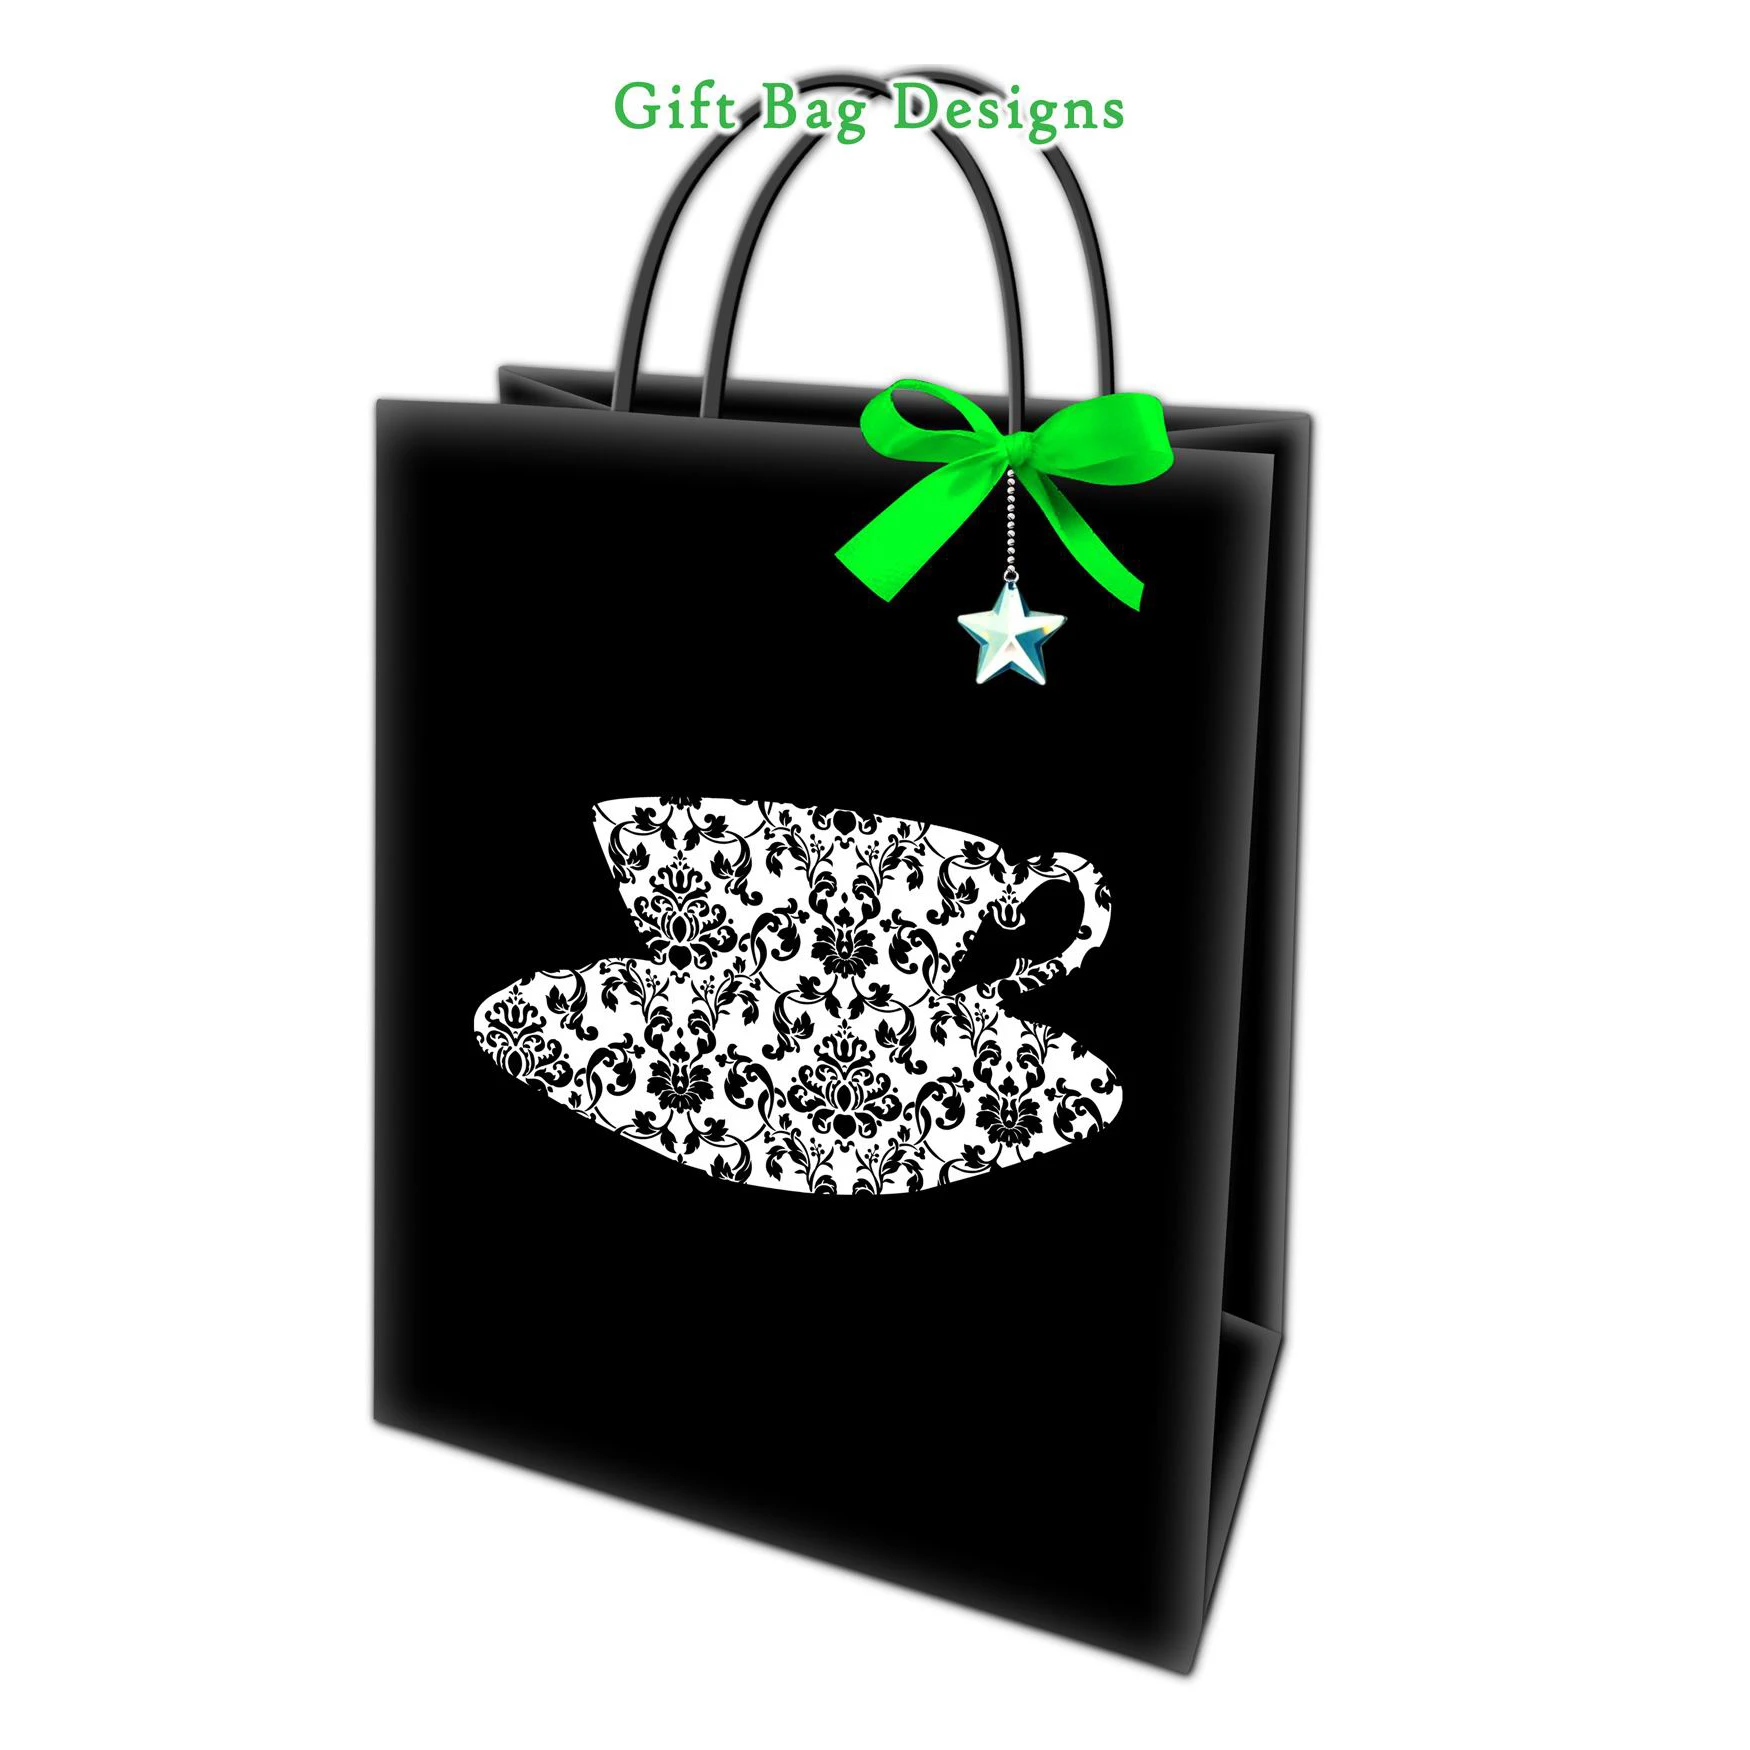 Jialan Package small plain white gift bags supplier for gift packing